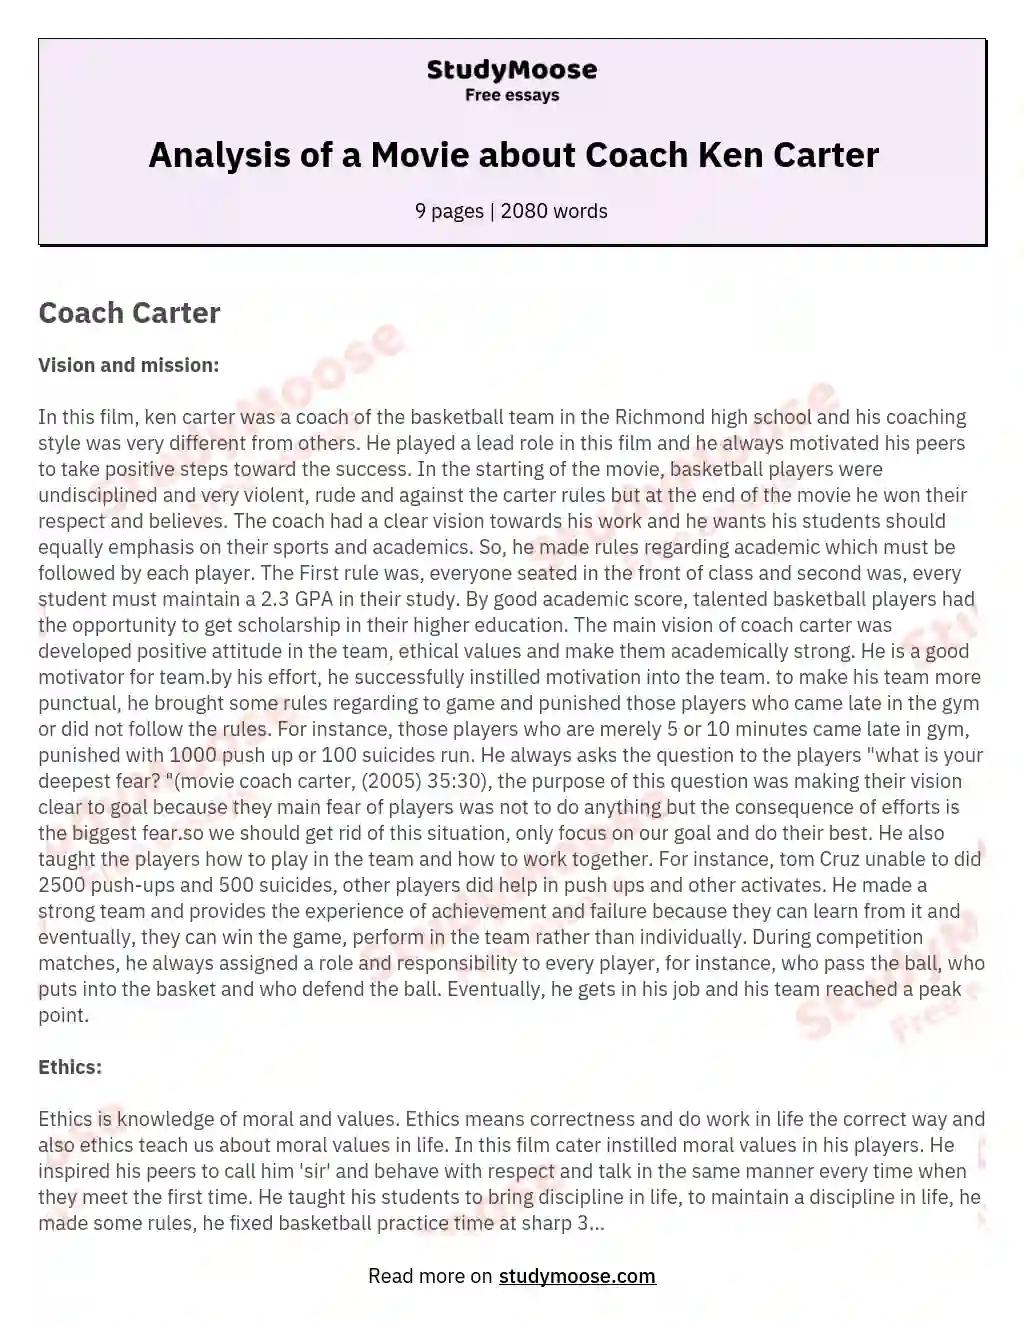 Analysis of a Movie about Coach Ken Carter